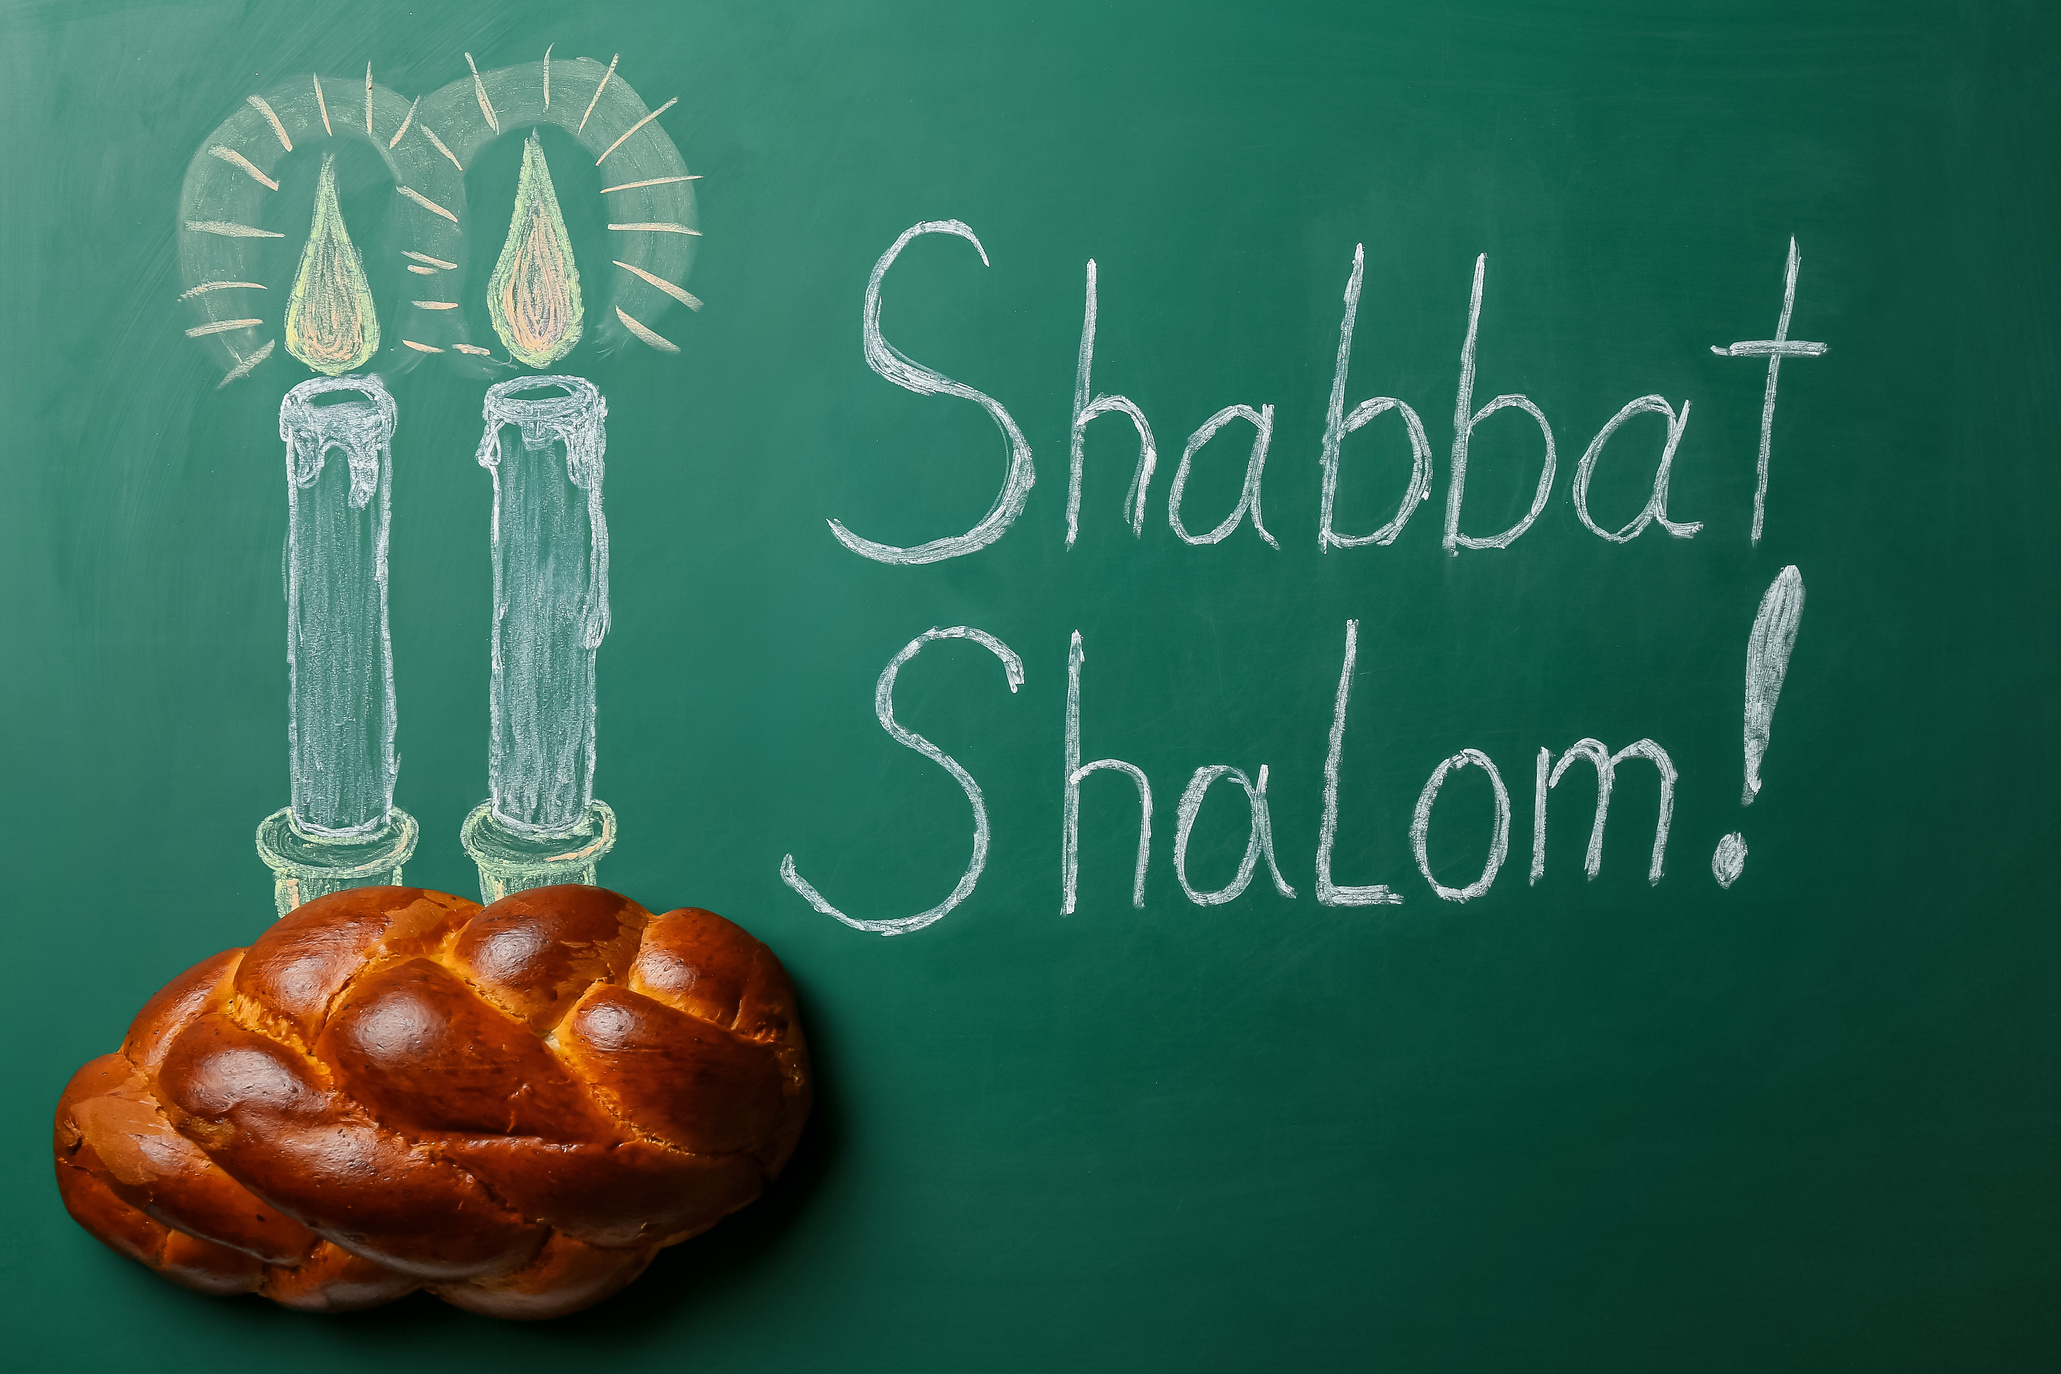 Drawn Glowing Candles and Written Text SHABBAT SHALOM with Traditional Challah Bread on Chalkboard